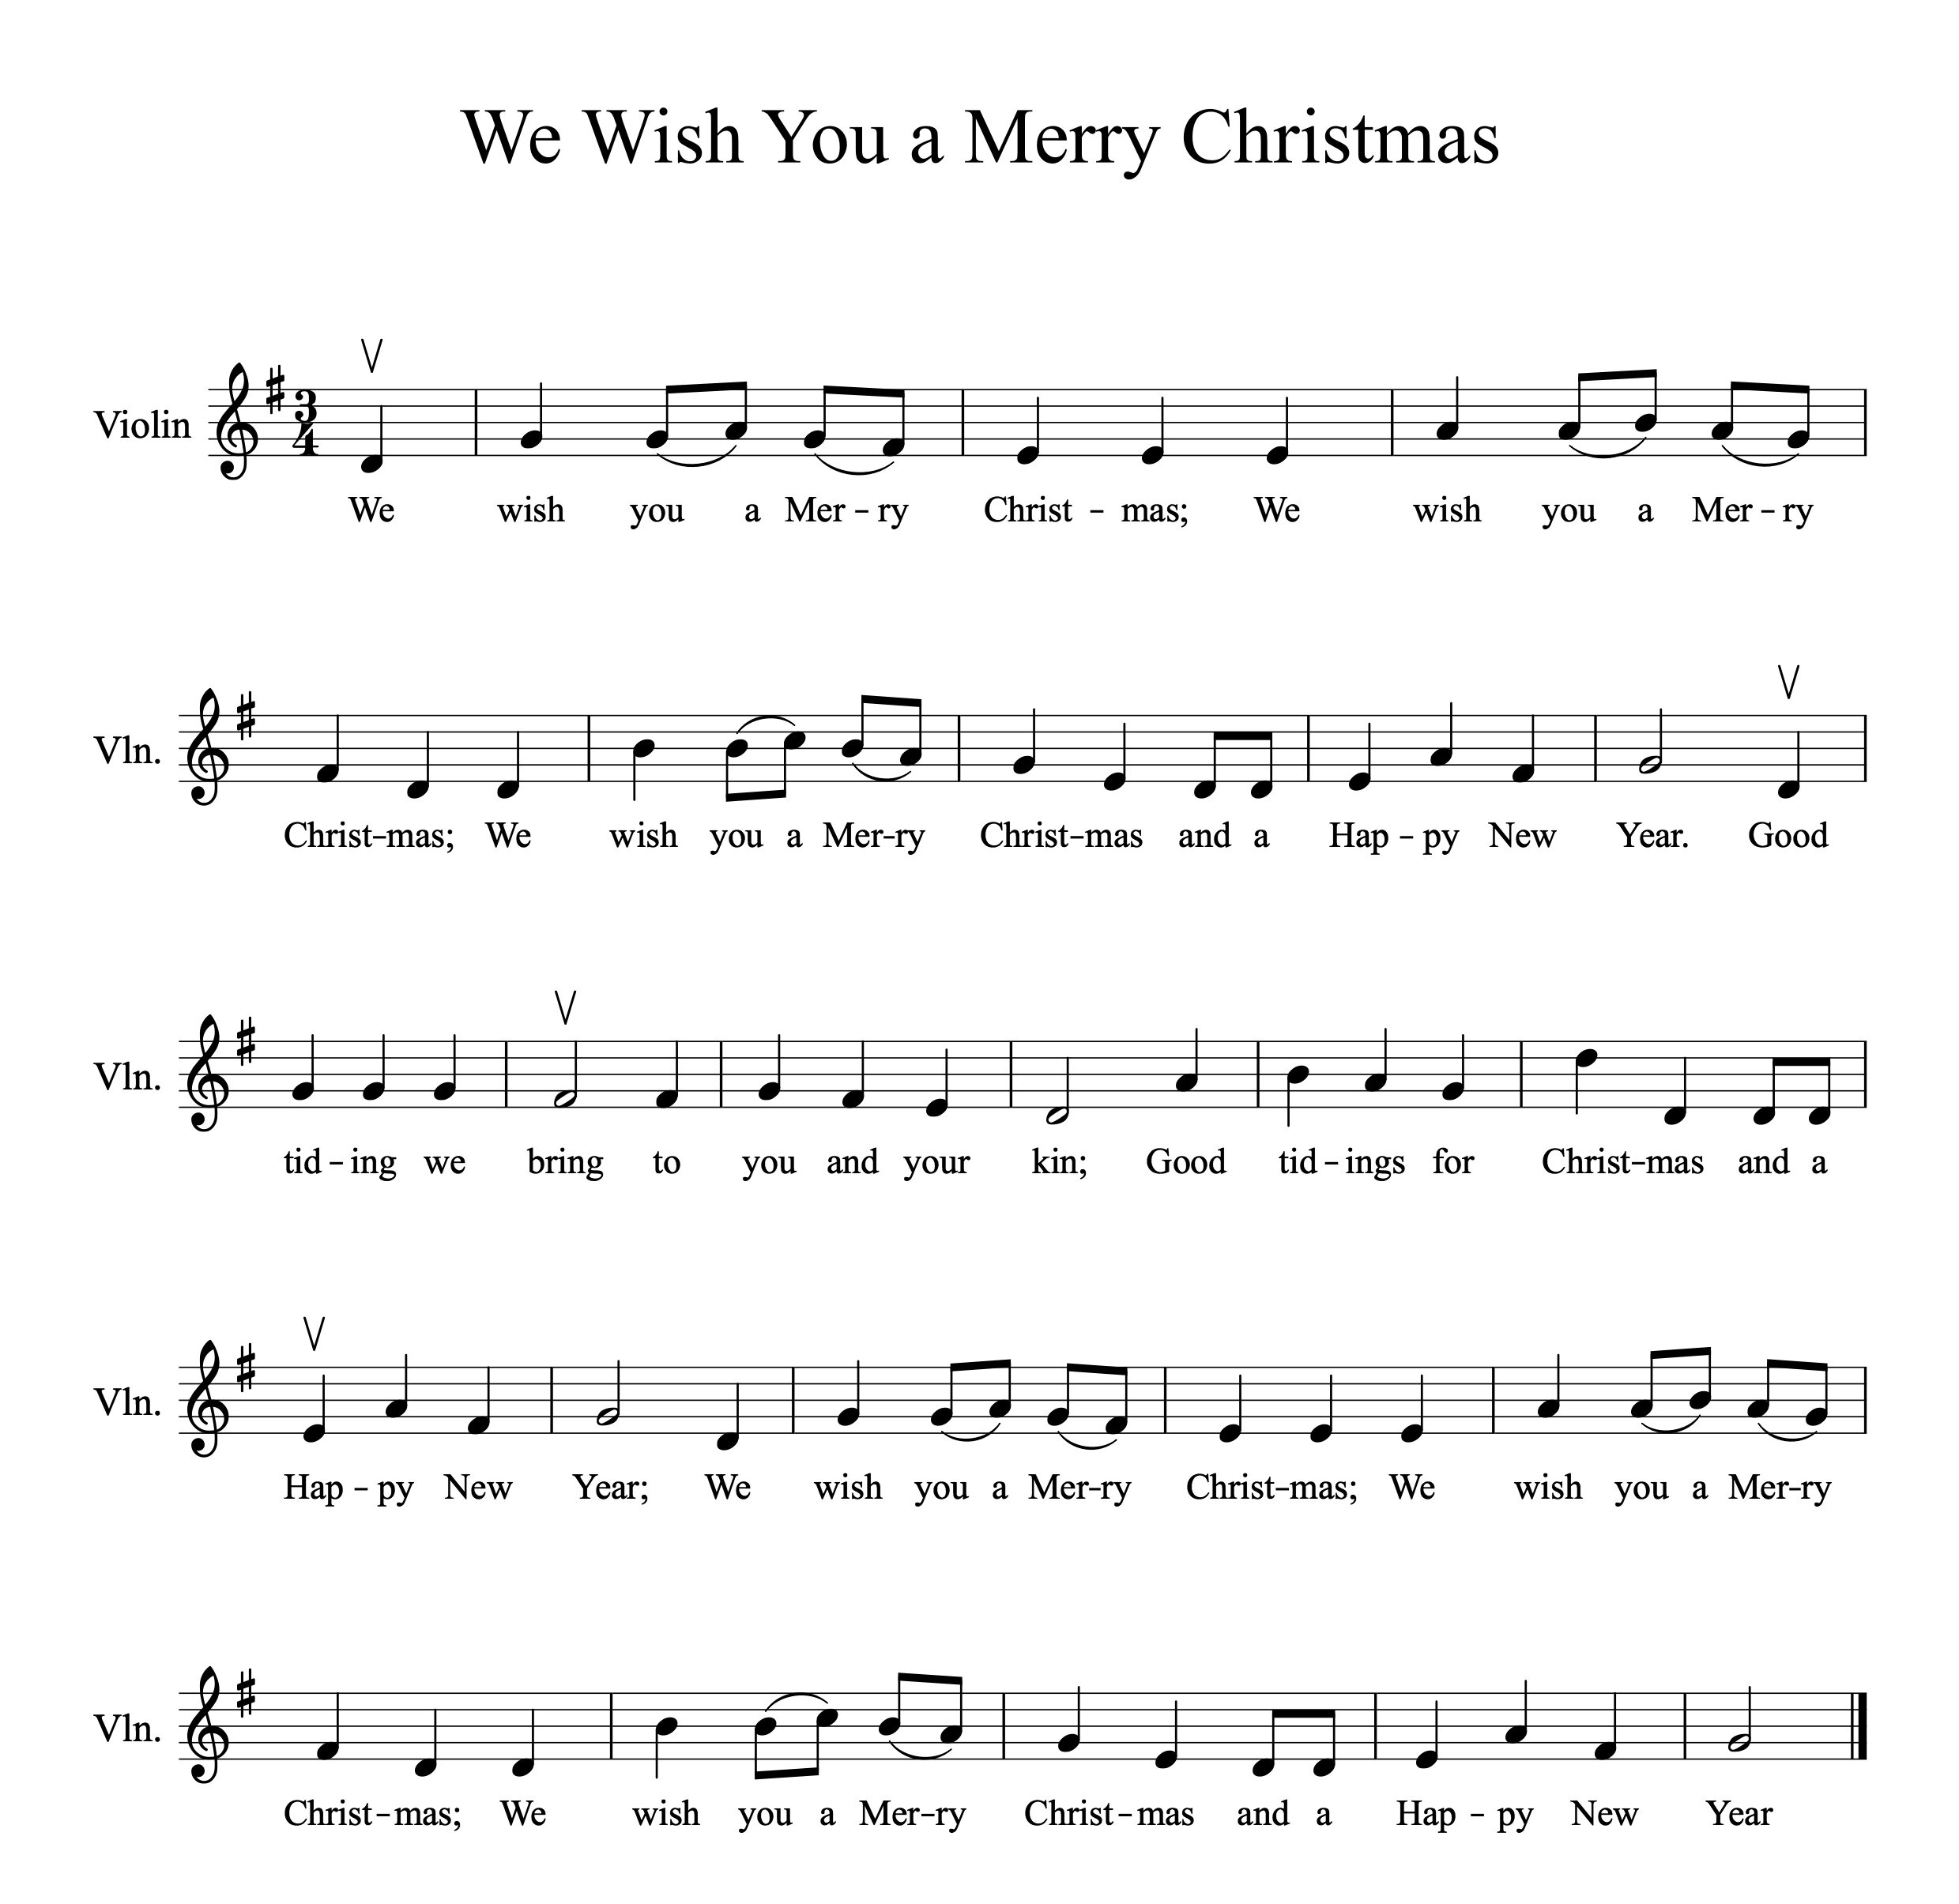 20 Favorite Christmas Songs: How to Play Lead Sheets - a Method